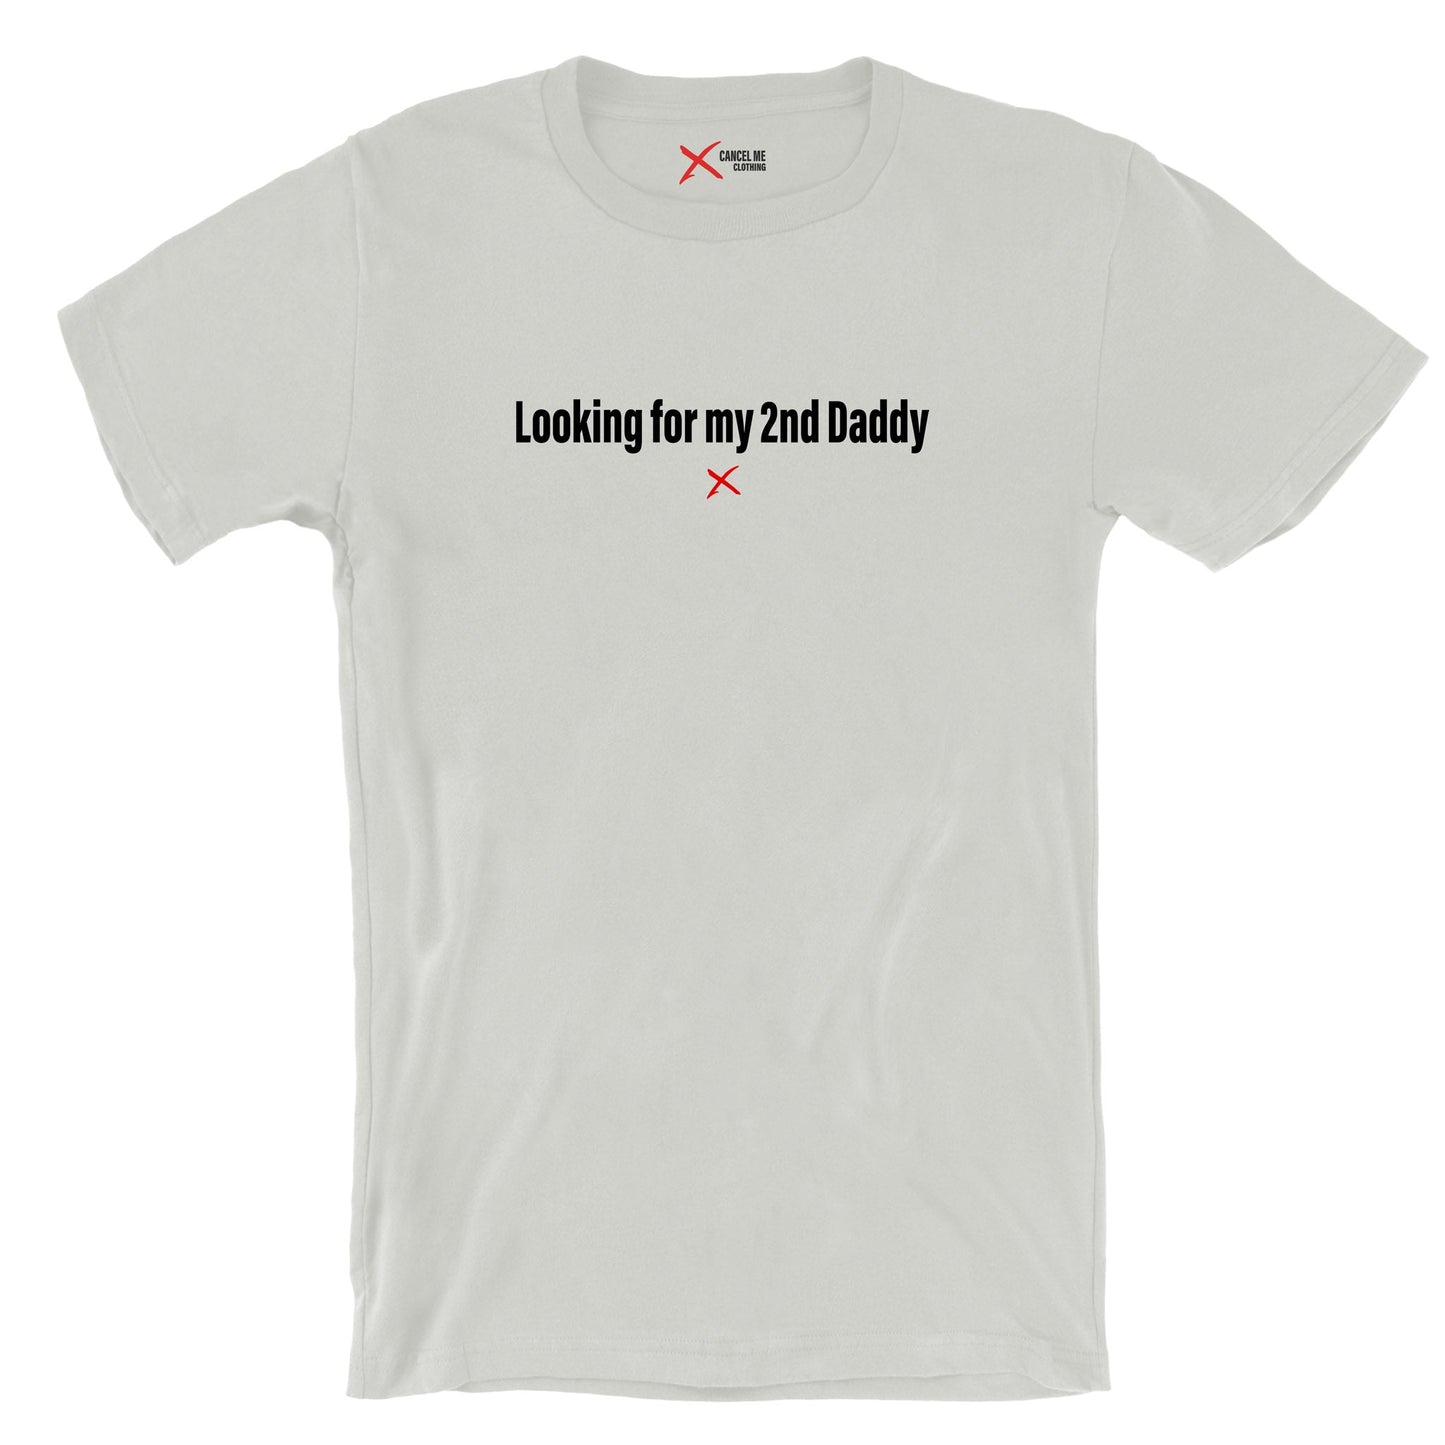 Looking for my 2nd Daddy - Shirt